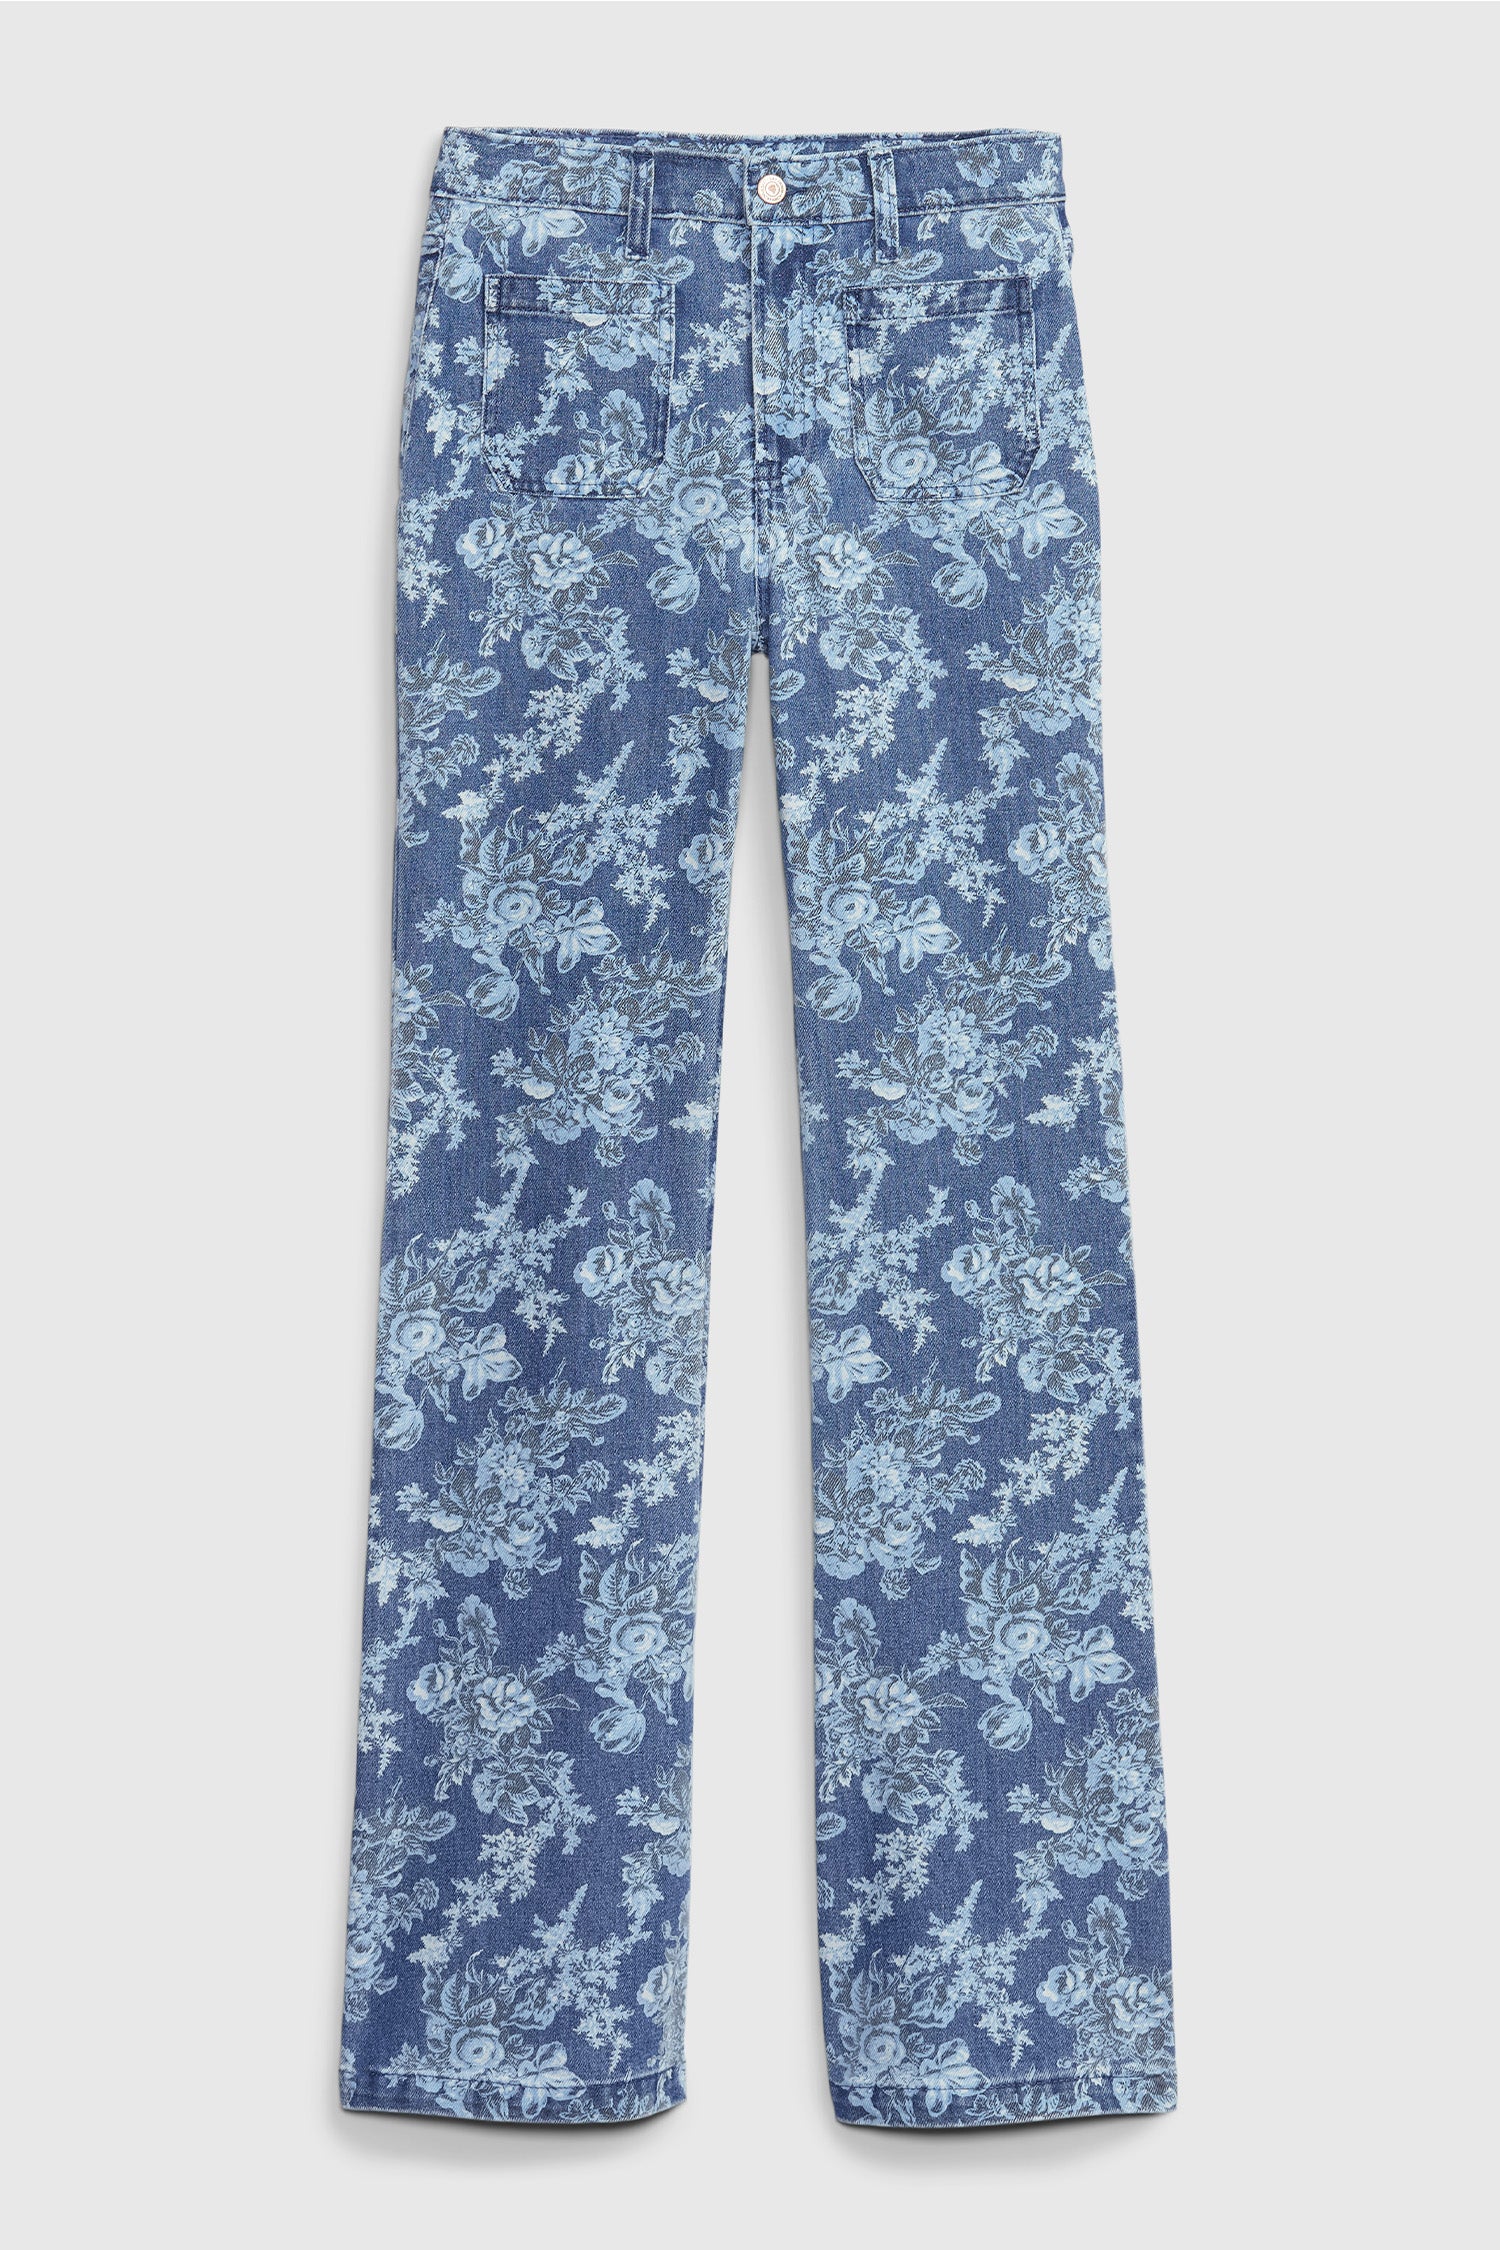 Blue floral high rise flare jeans with square pockets at the front